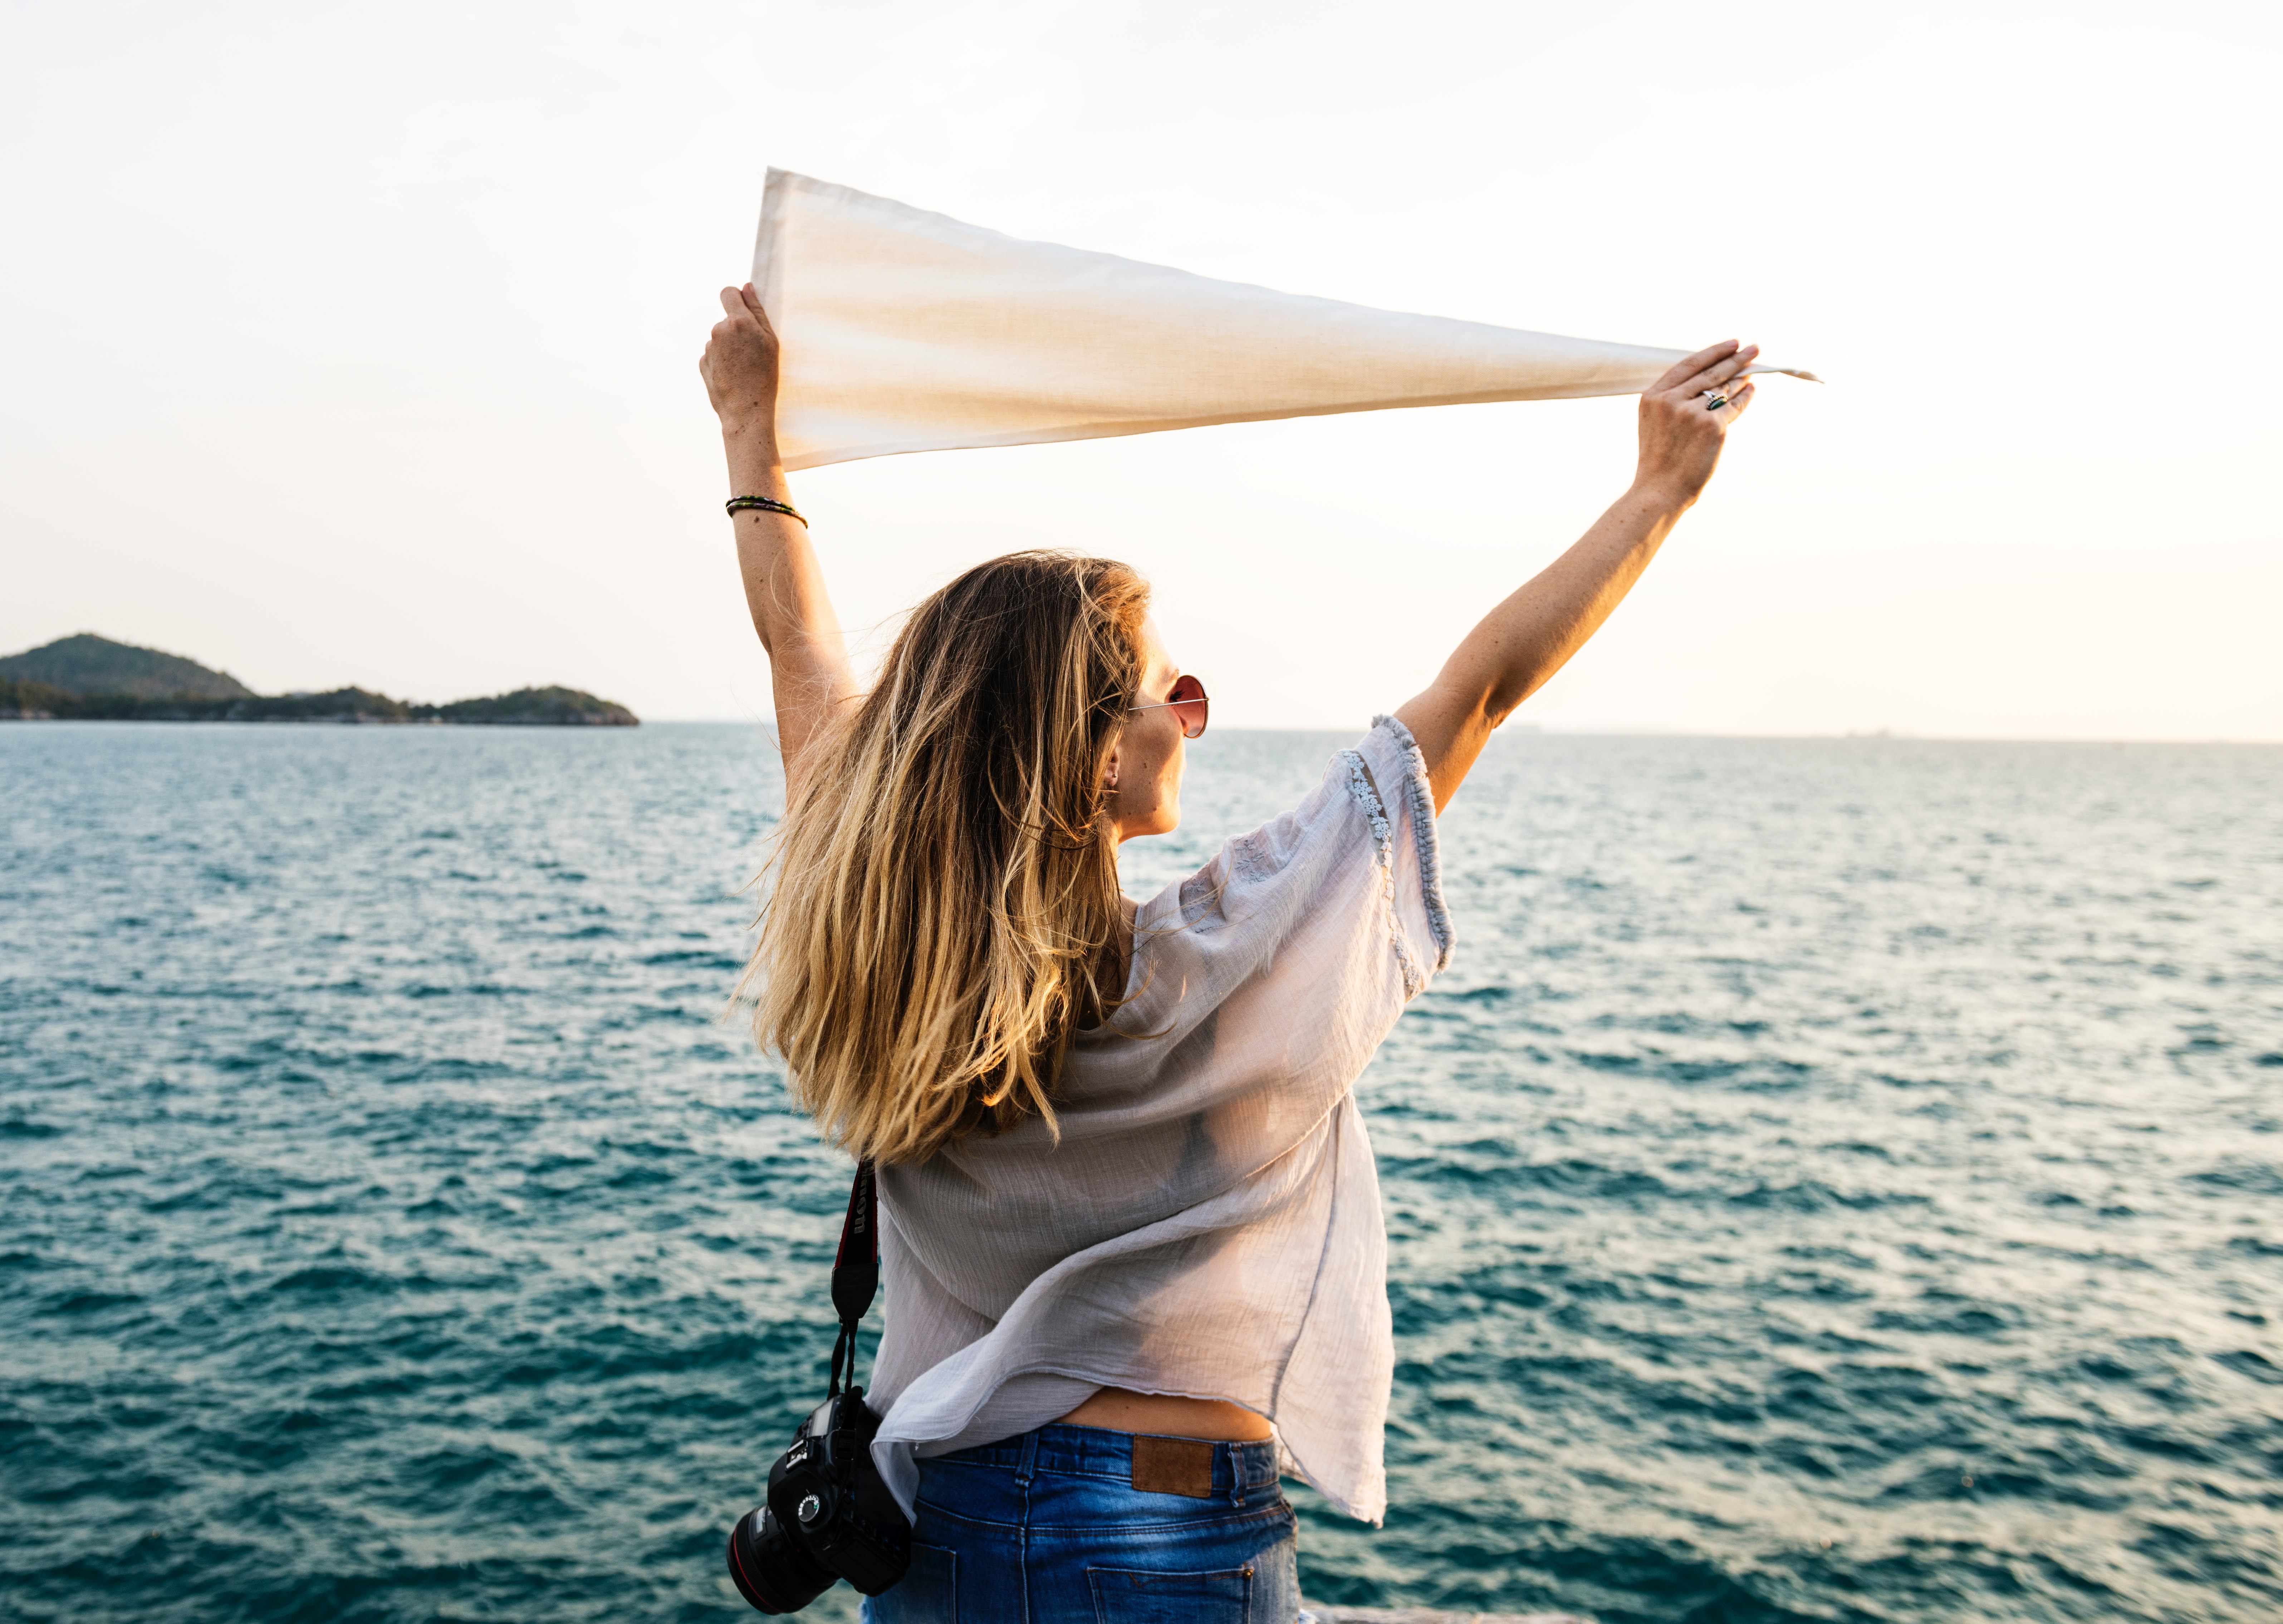 Photo of Woman Wearing White Top, Blue Bottoms and Black Dslr Camera Holding White Textile While Facing the Ocean, Adventure, Tour, Recreation, Relaxation, HQ Photo